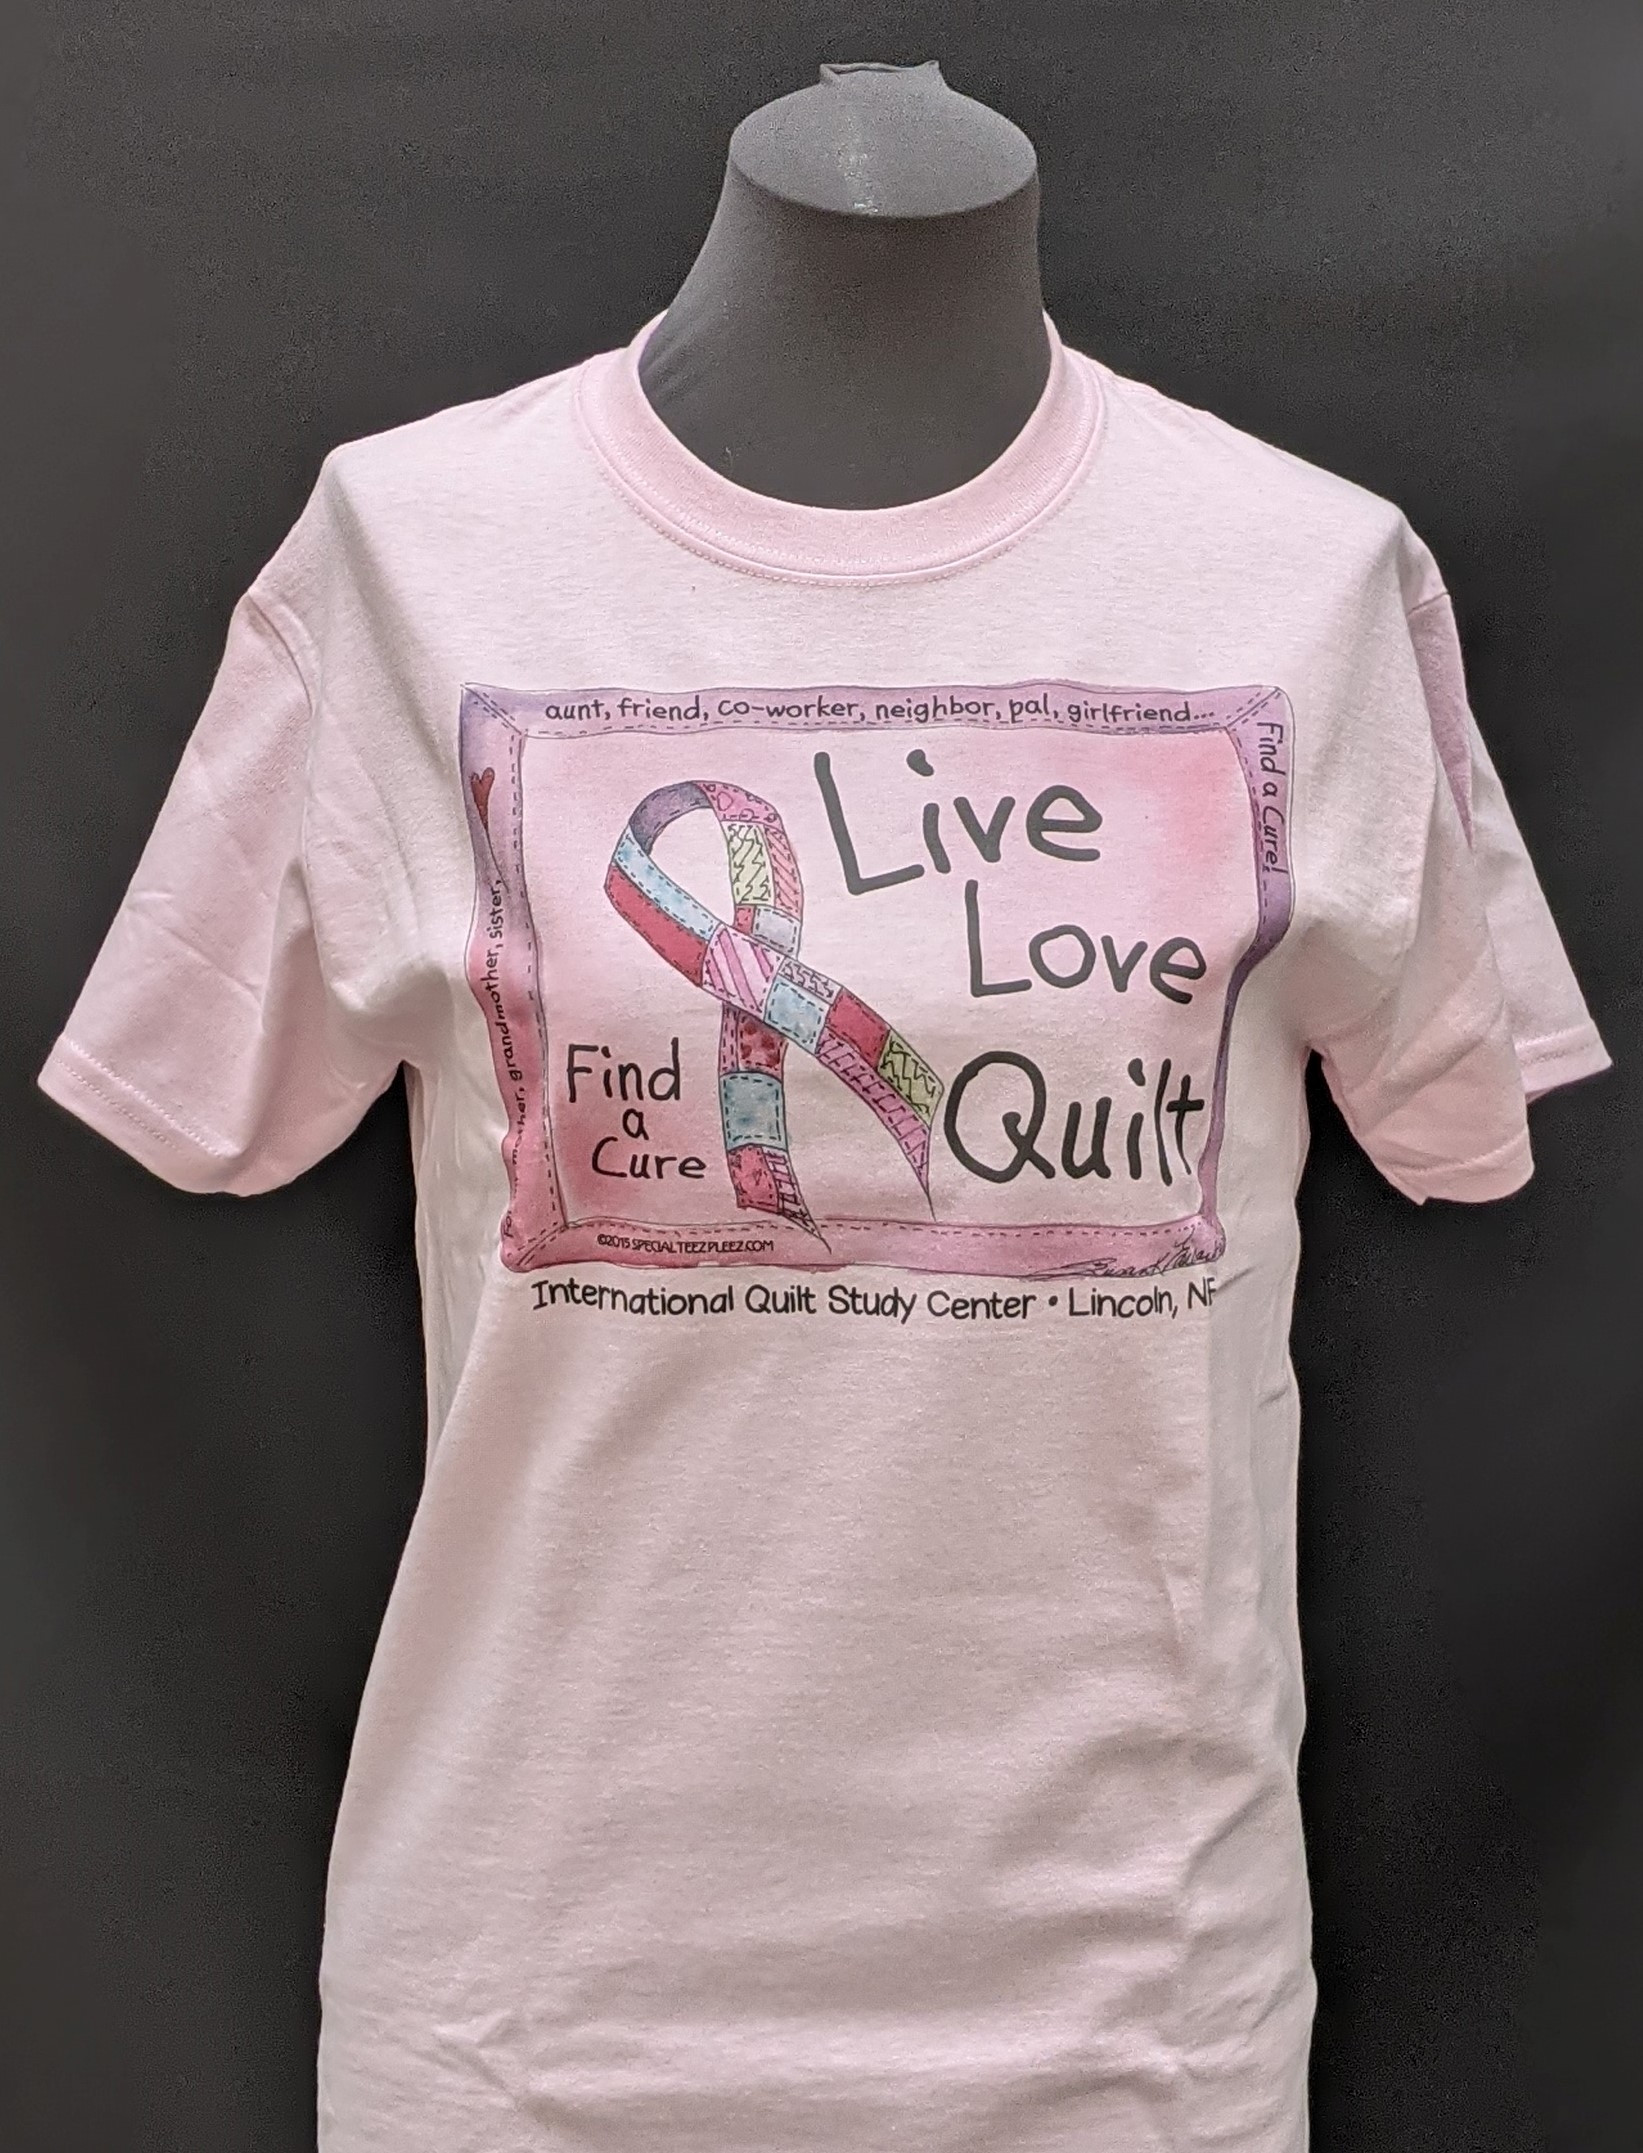 Live, Love, Quilt - Find A Cure T-Shirt